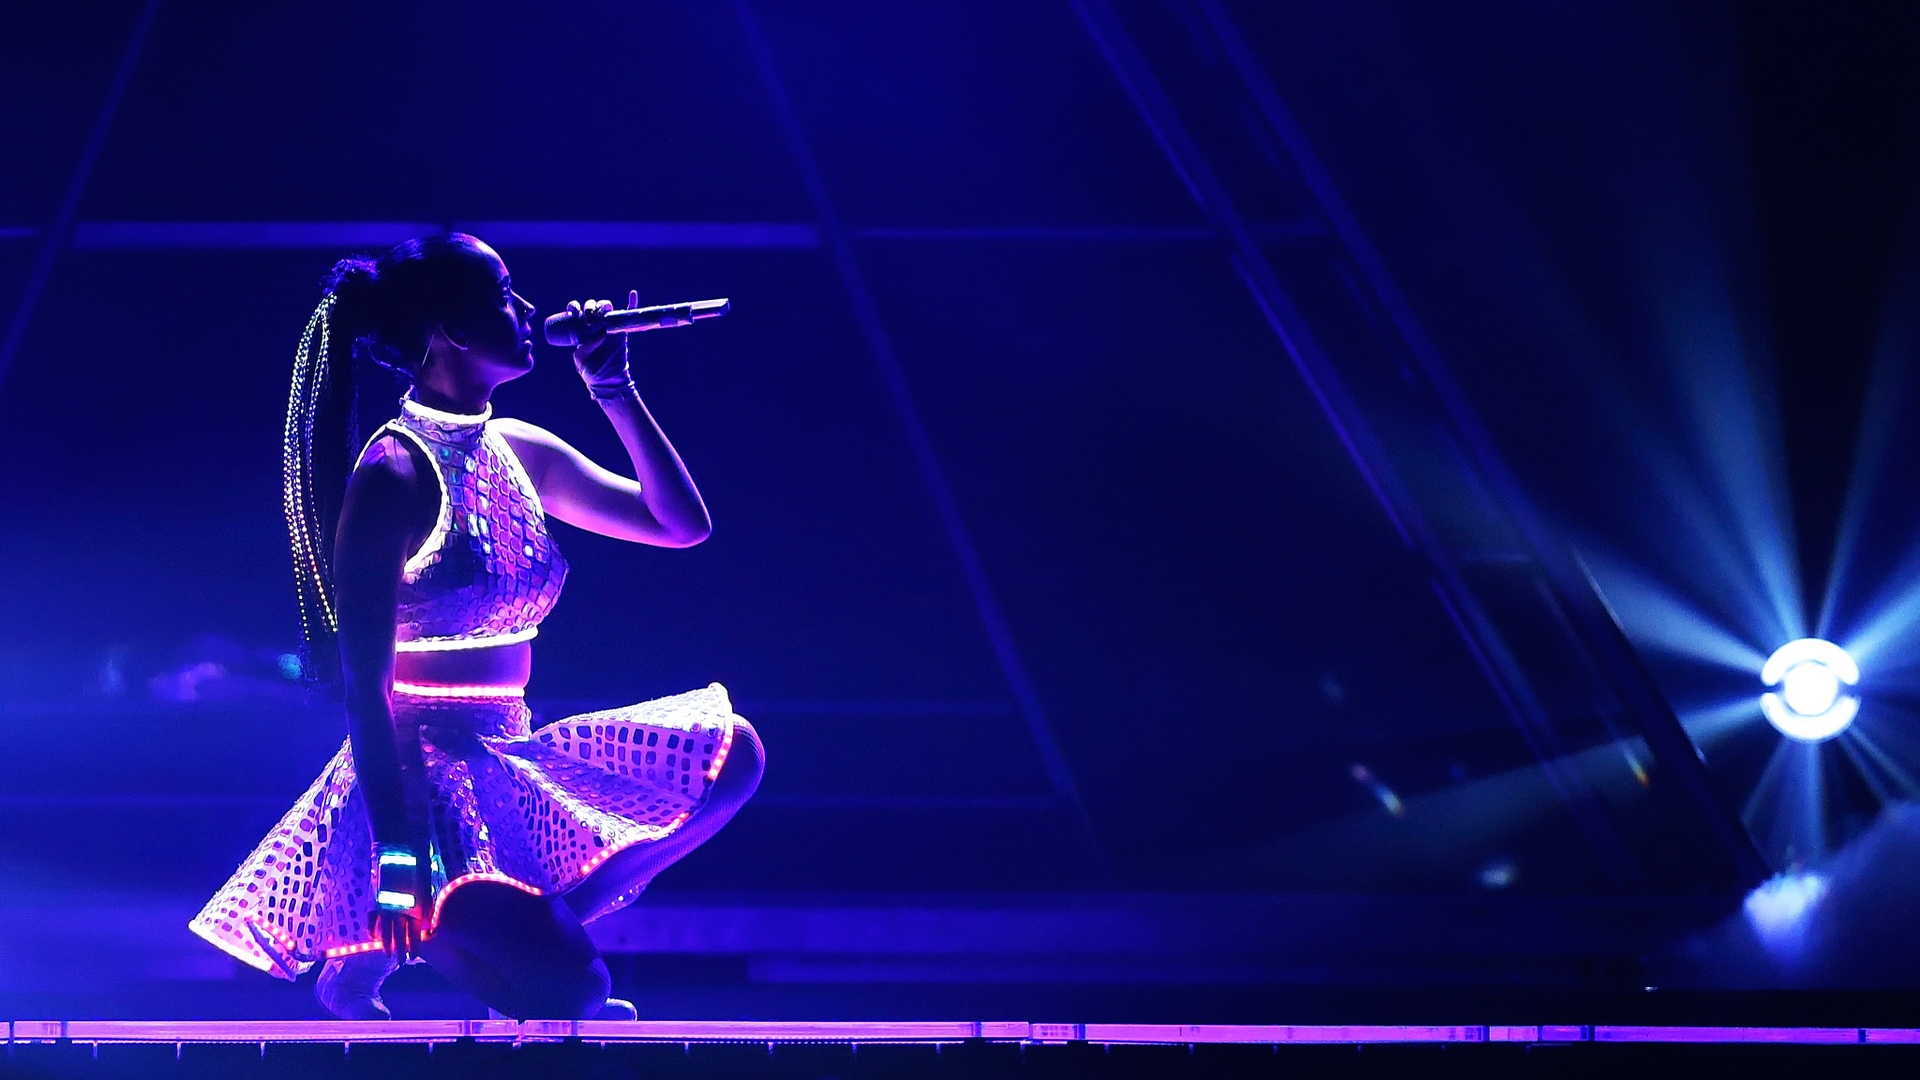 Katy Perry Live Concert for 1920 x 1080 HDTV 1080p resolution